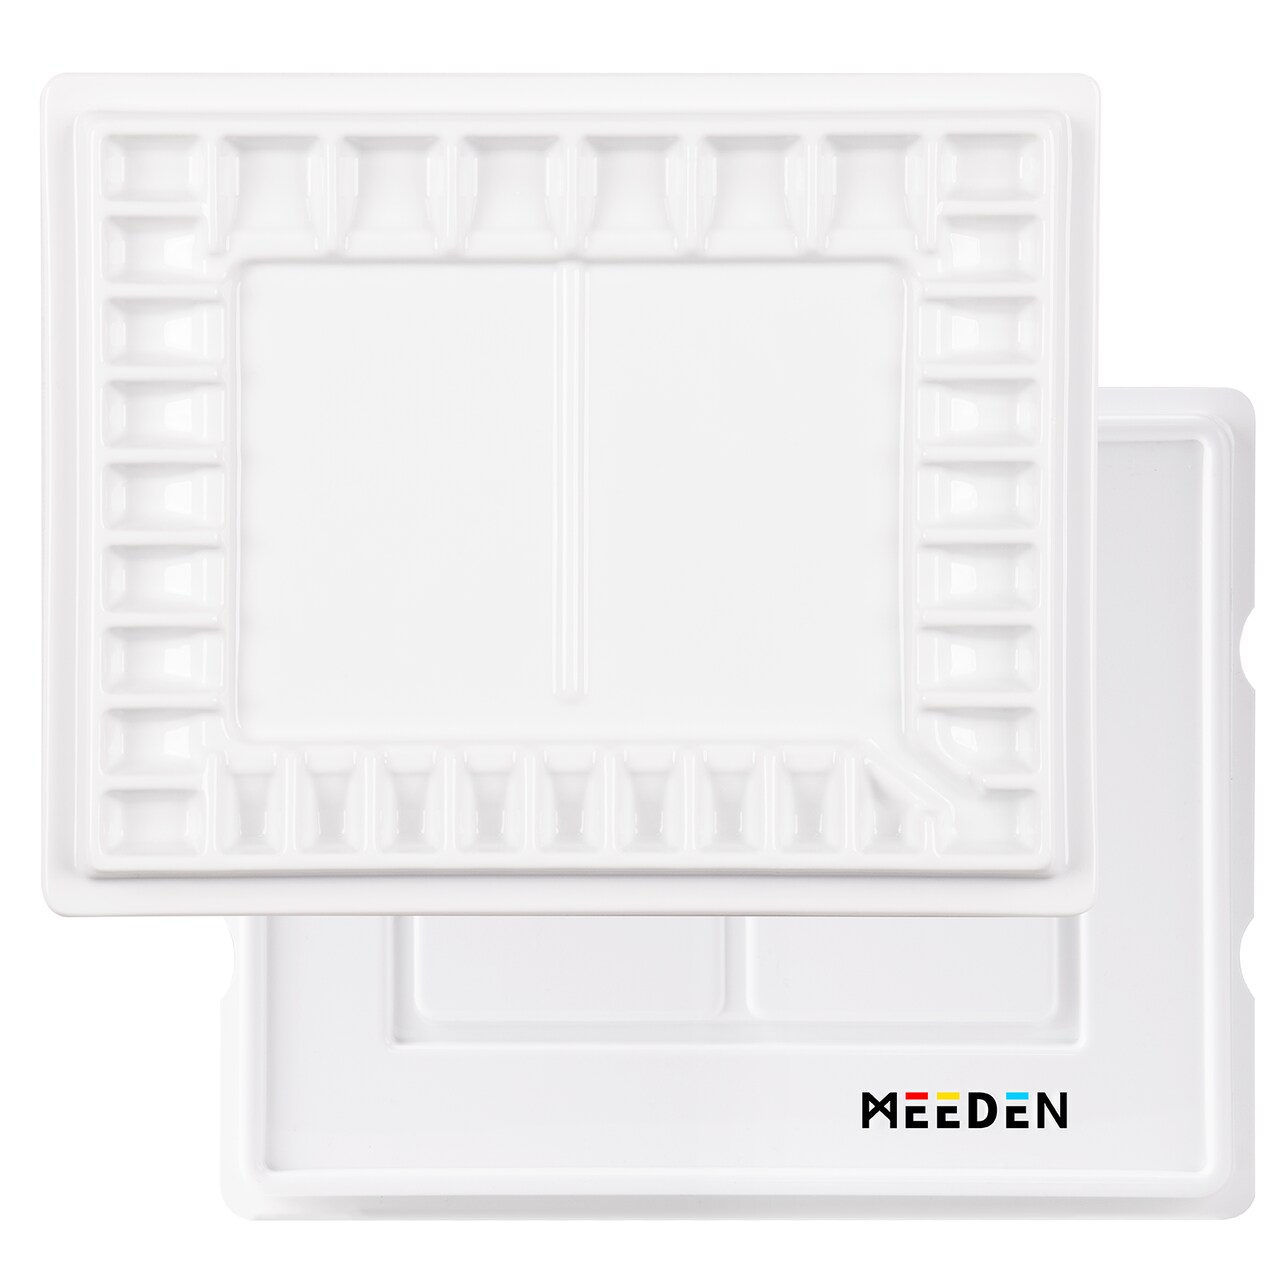 MEEDEN 33-Well Porcelain Painting Palette with Plastic Cover, Ceramic  Palette with Lid for Watercolor, Acrylic, Other Water Based Paint, 13-1/2  by 10.8-Inch, Watercolor Mixing Tray for Expert Painter